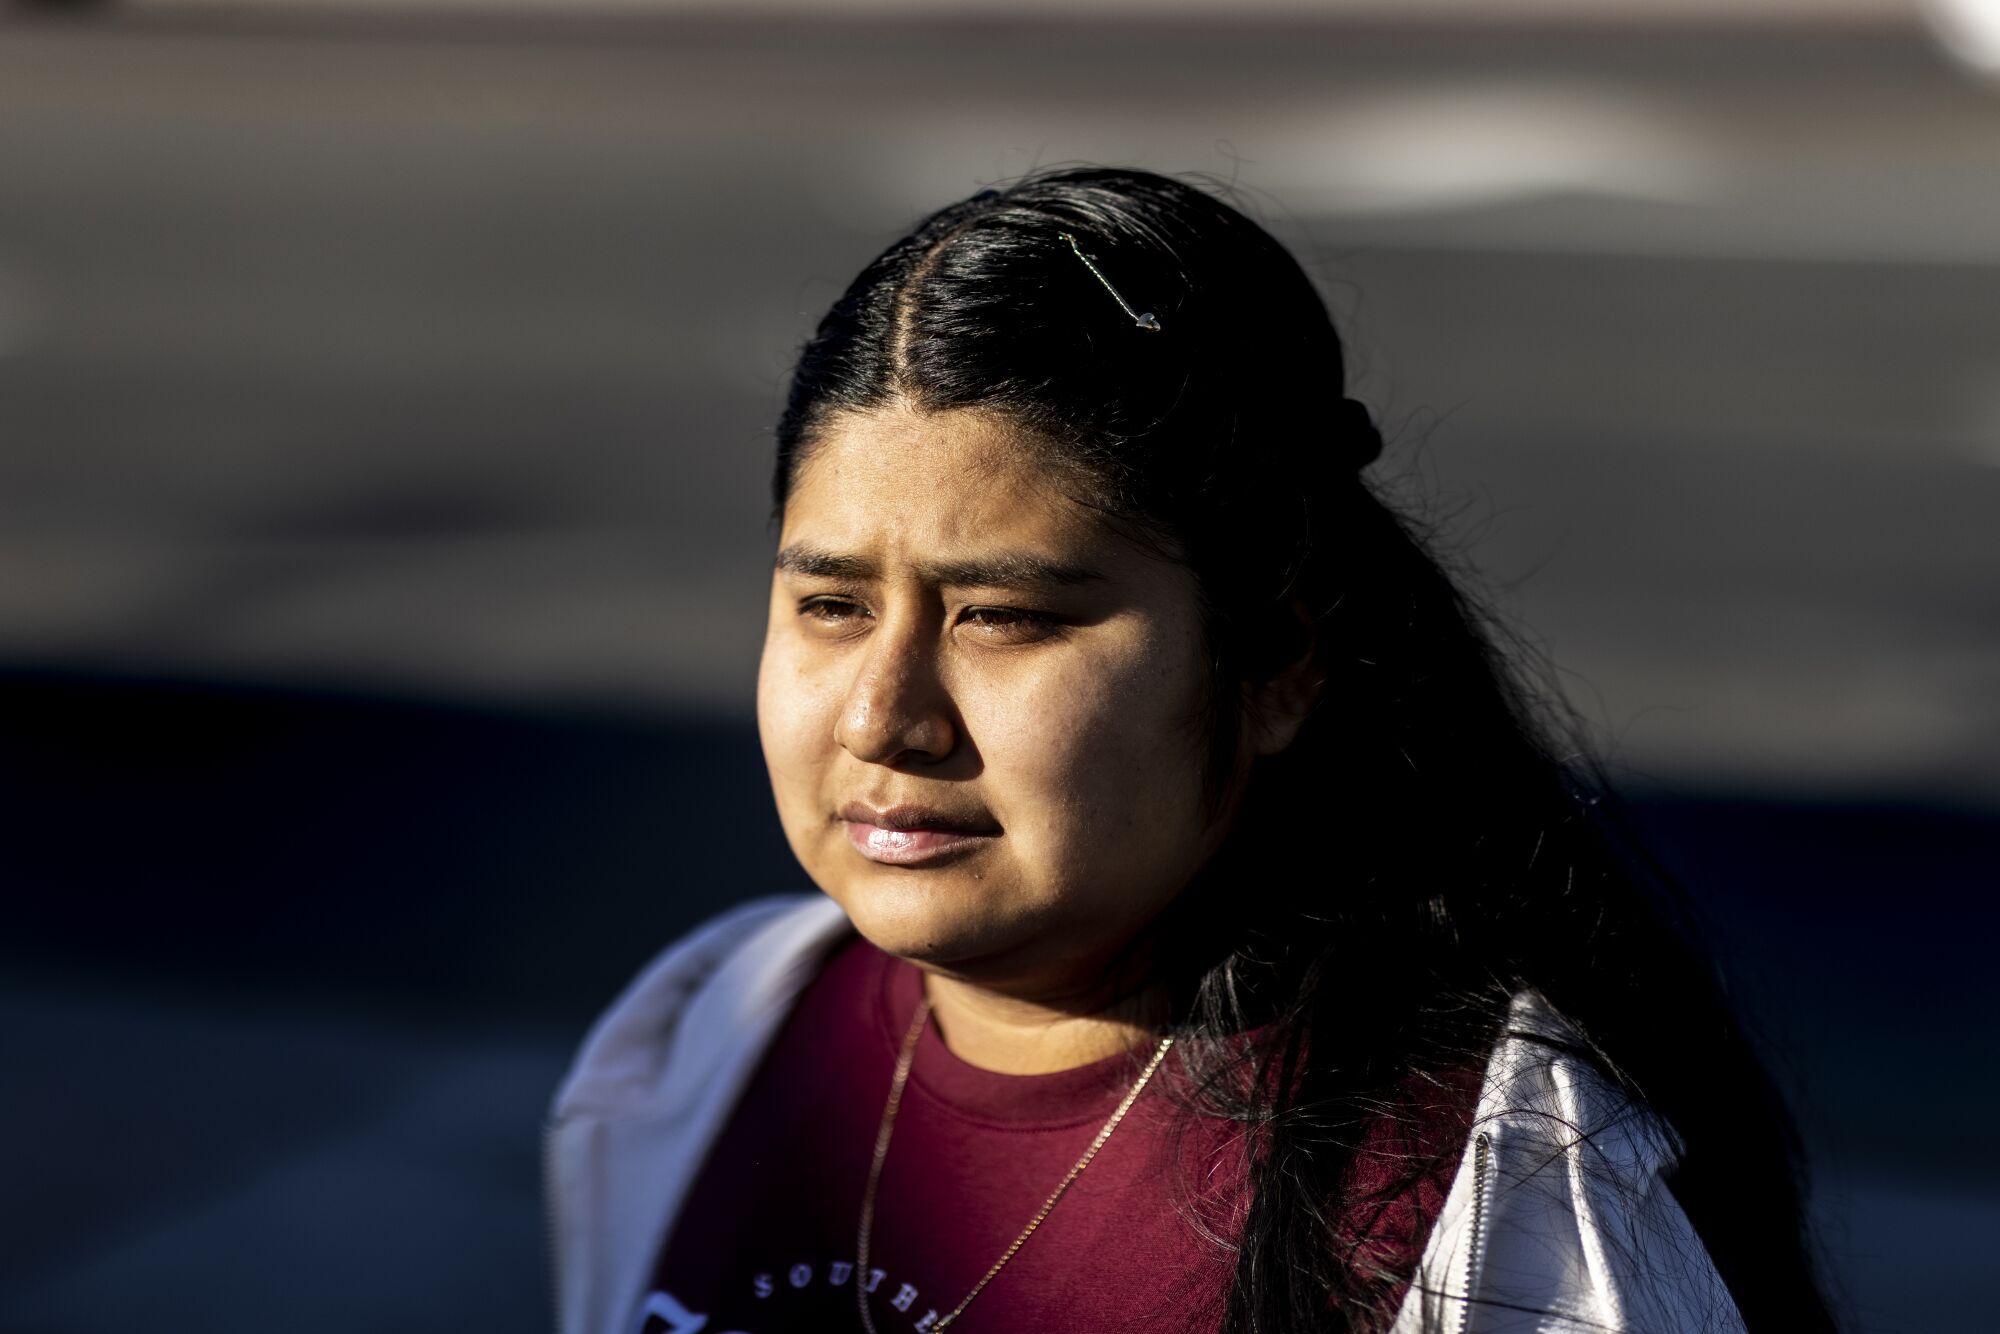 Denisse Lopez, an 18-year-old UCSD student